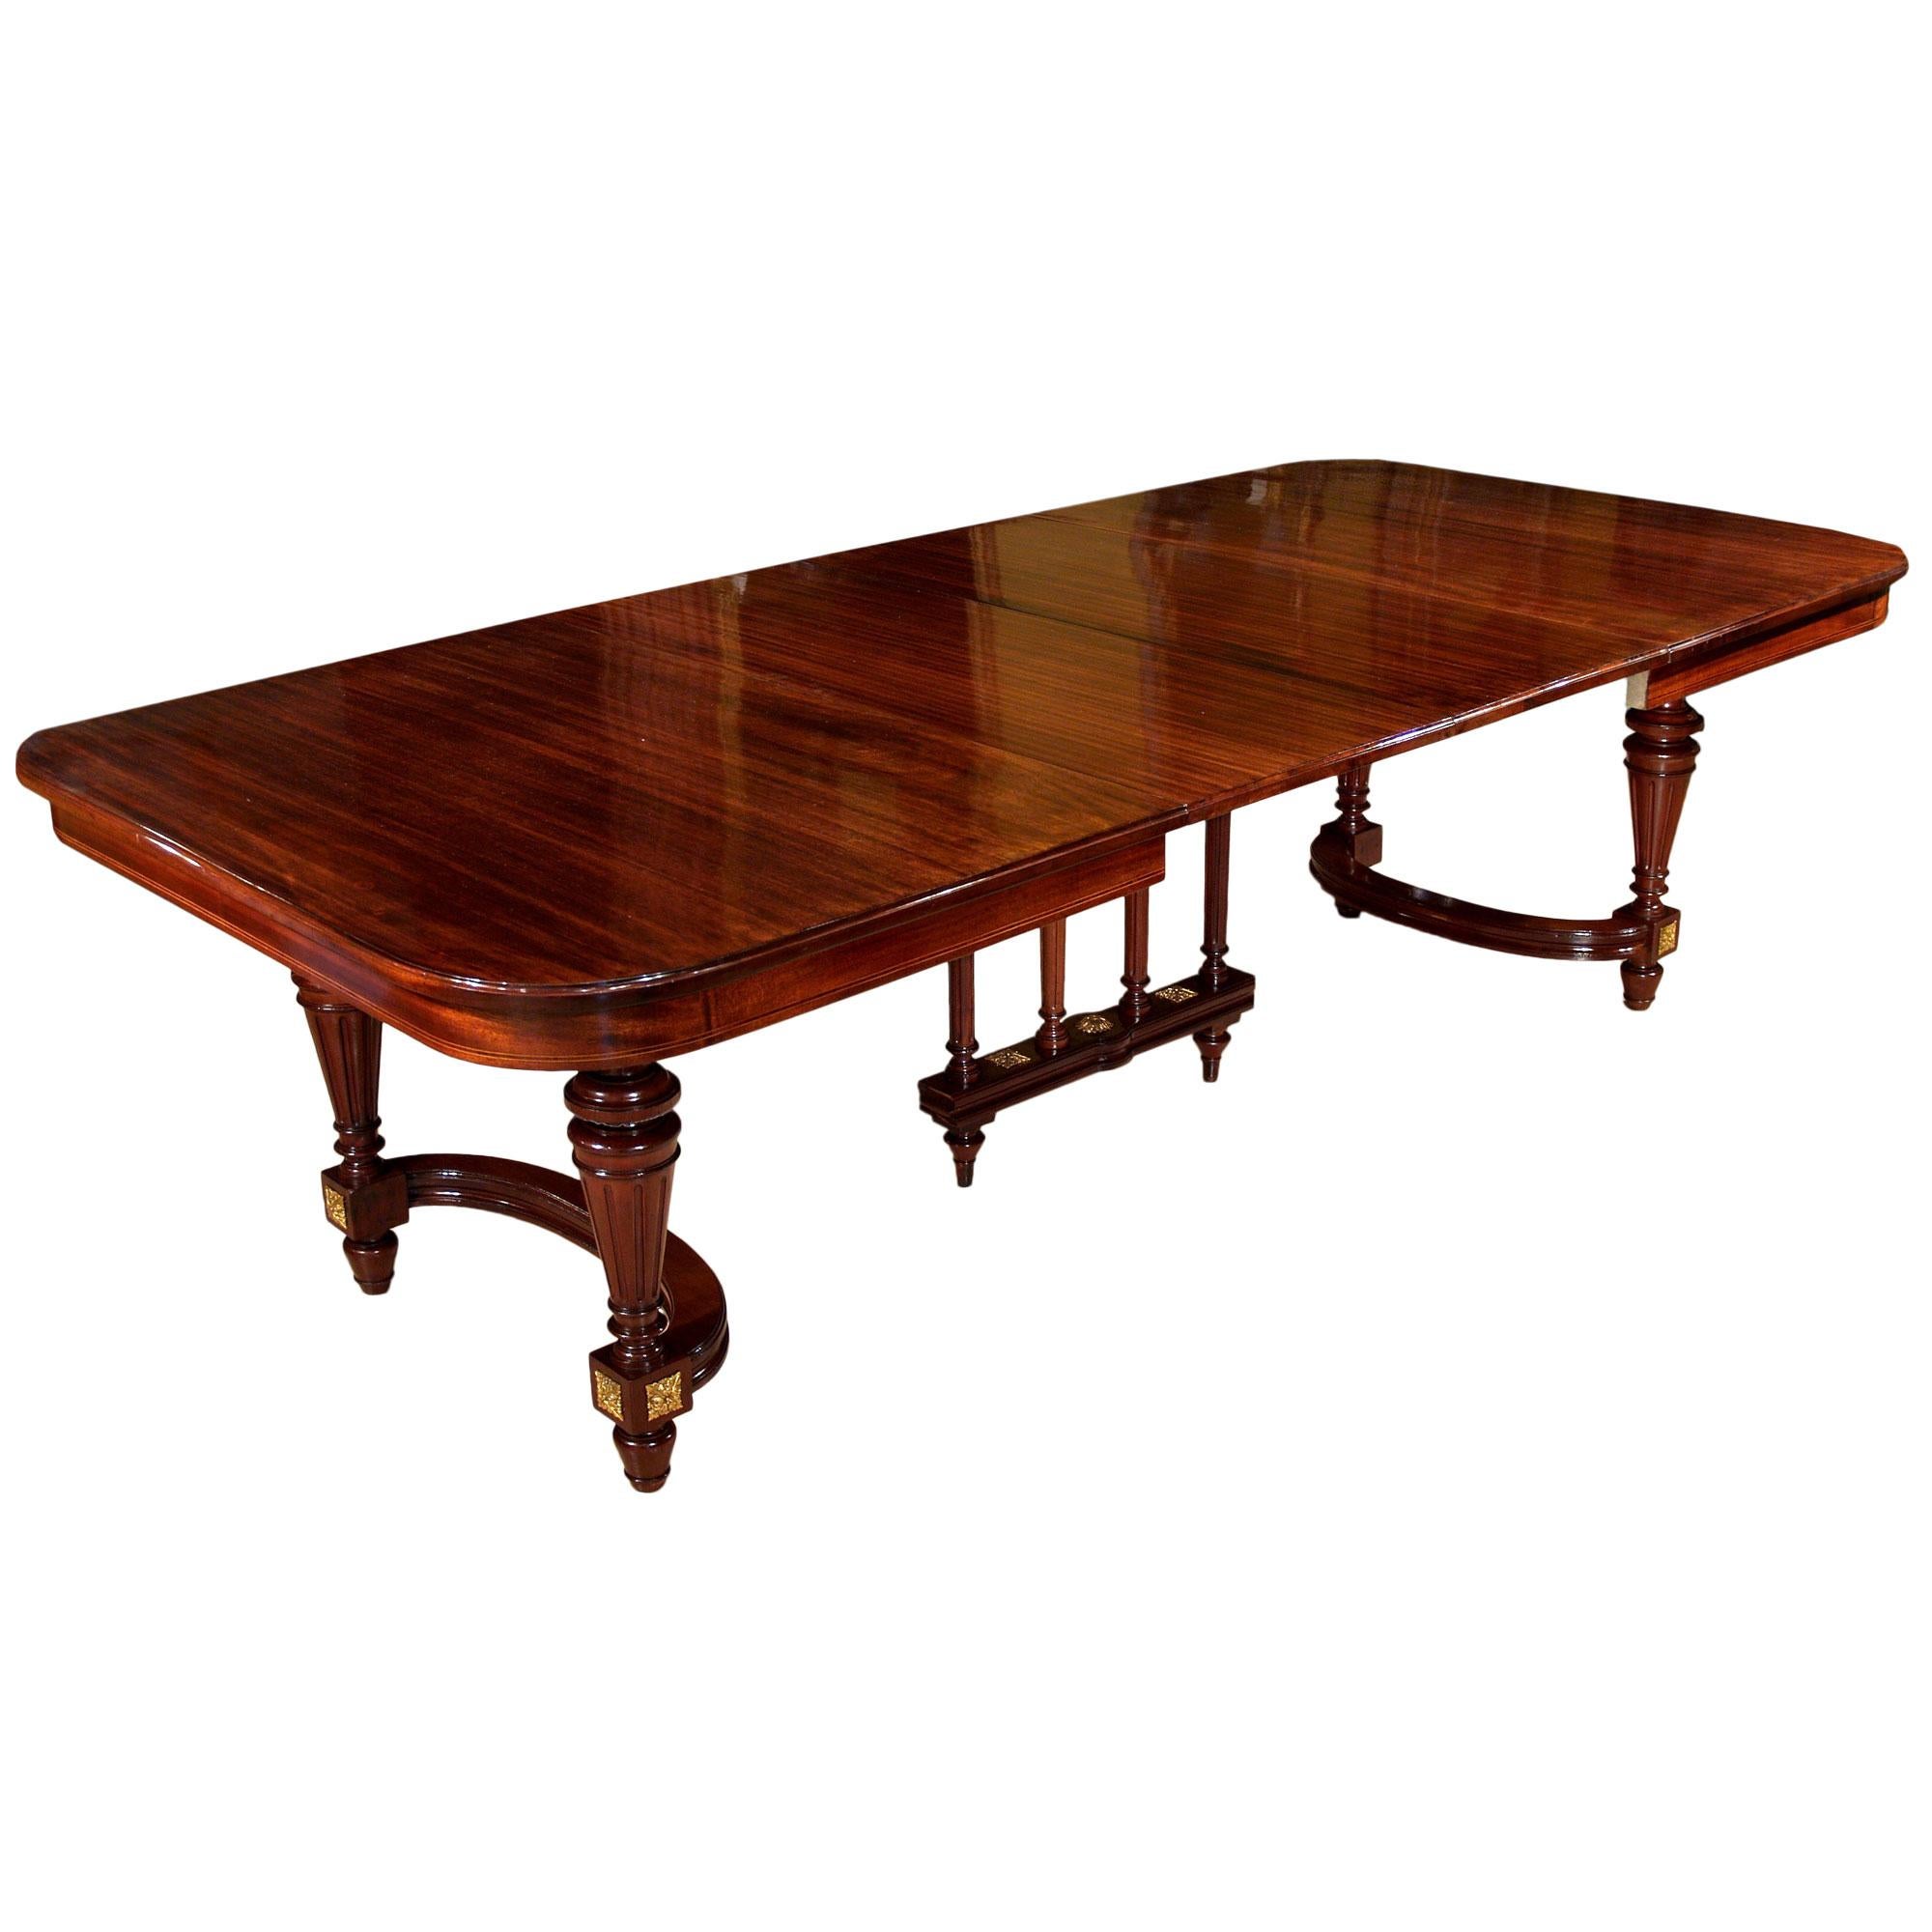 An exquisite French 19th century Louis XVI st. mahogany dining table with two extensions. The table is raised by Impressive circular fluted tapered legs with an 'h' stretcher. The stretcher is with three additional fluted columns. Each leg is